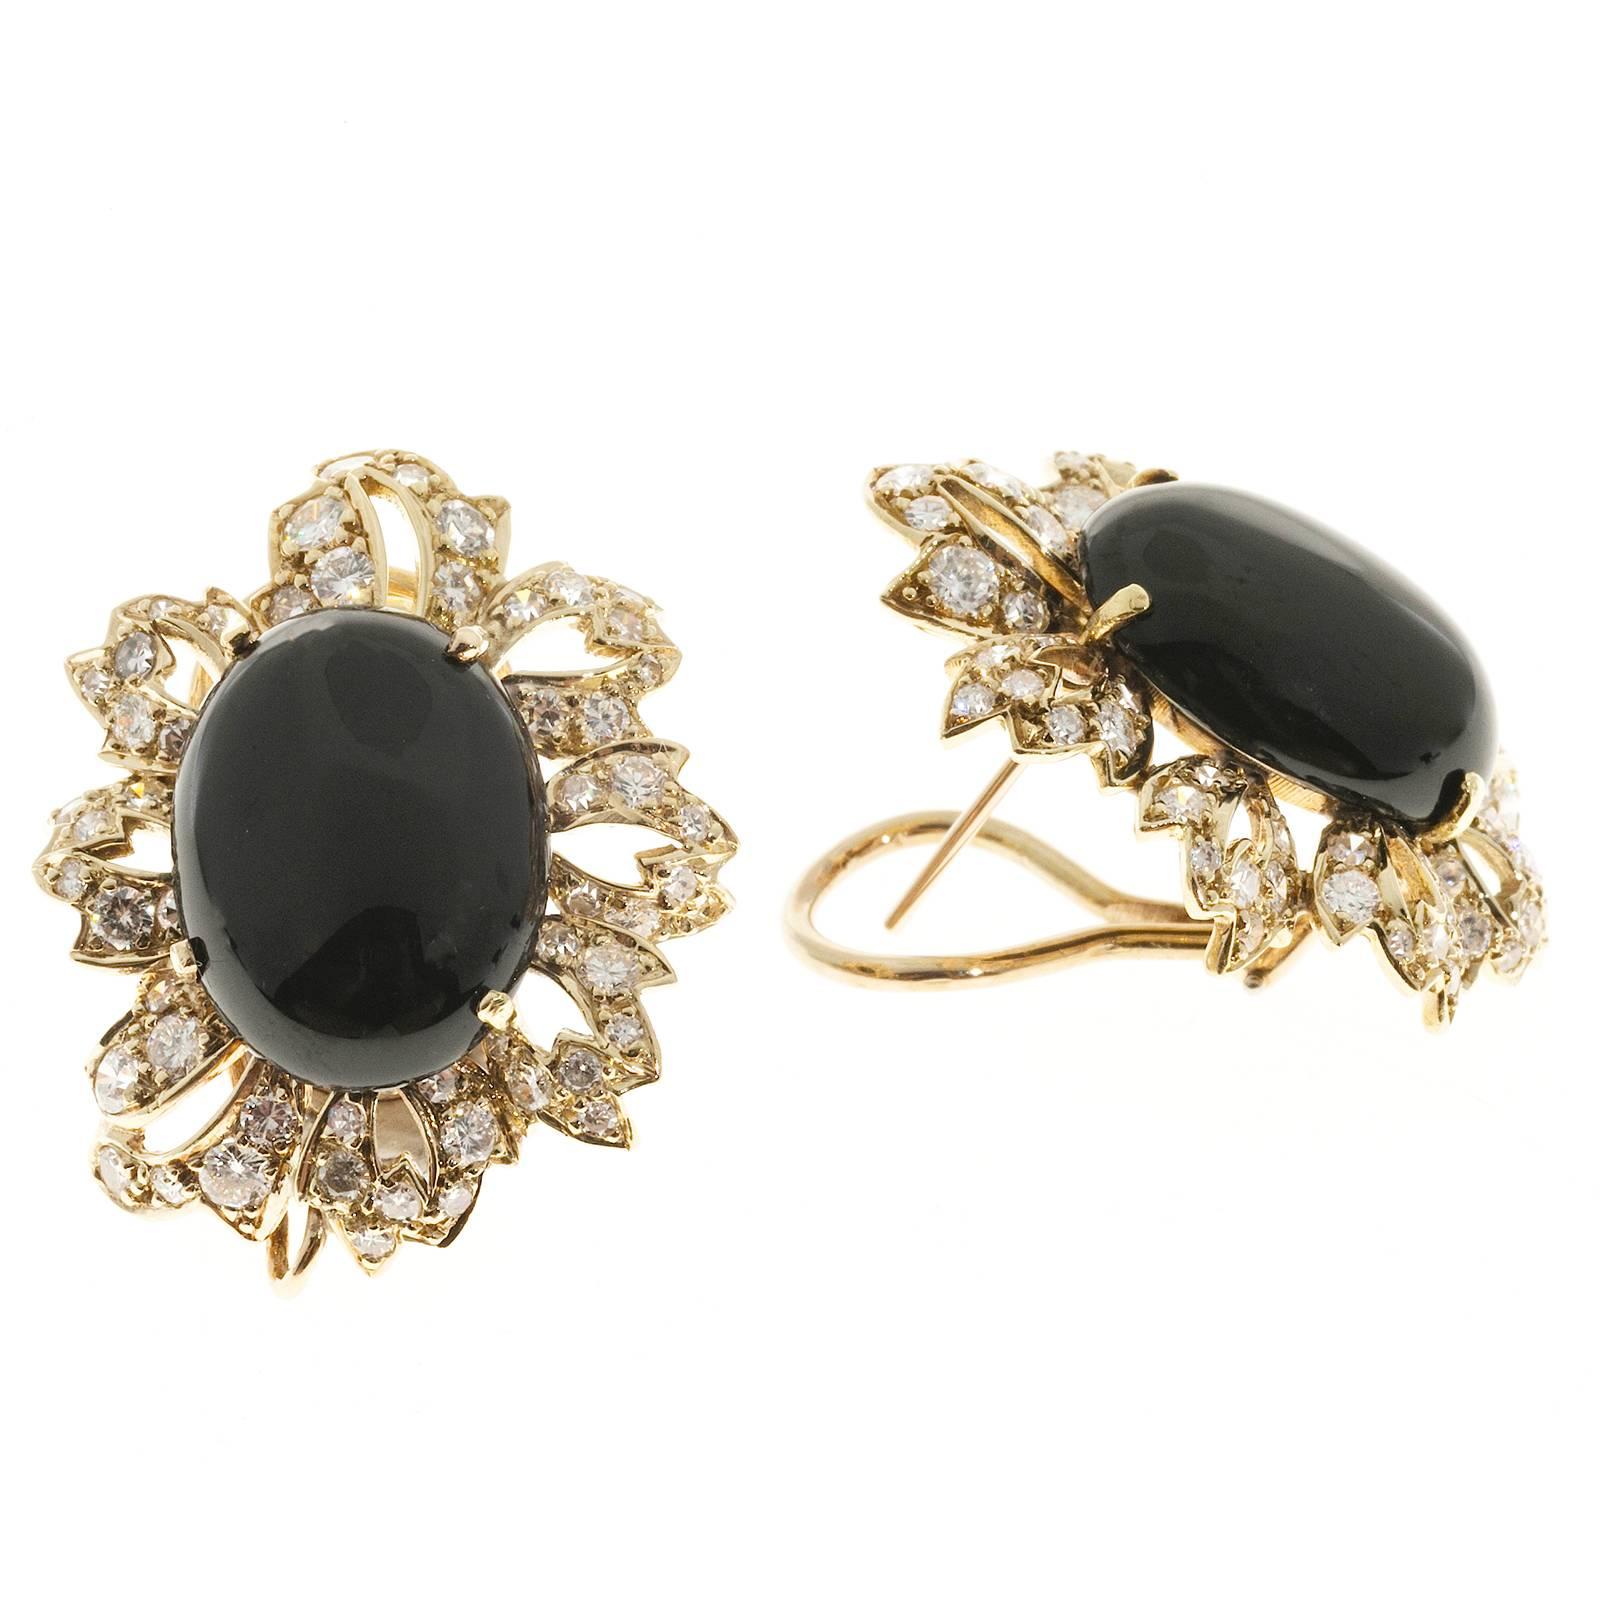 Cabochon Onyx Diamond Handmade Gold Earrings. 1930 to 1939 clip post earrings with 120 bright sparkly bead set diamond. The center of each is set with a cabochon genuine black onyx with a high polish.

120 mele diamonds approx. total weight